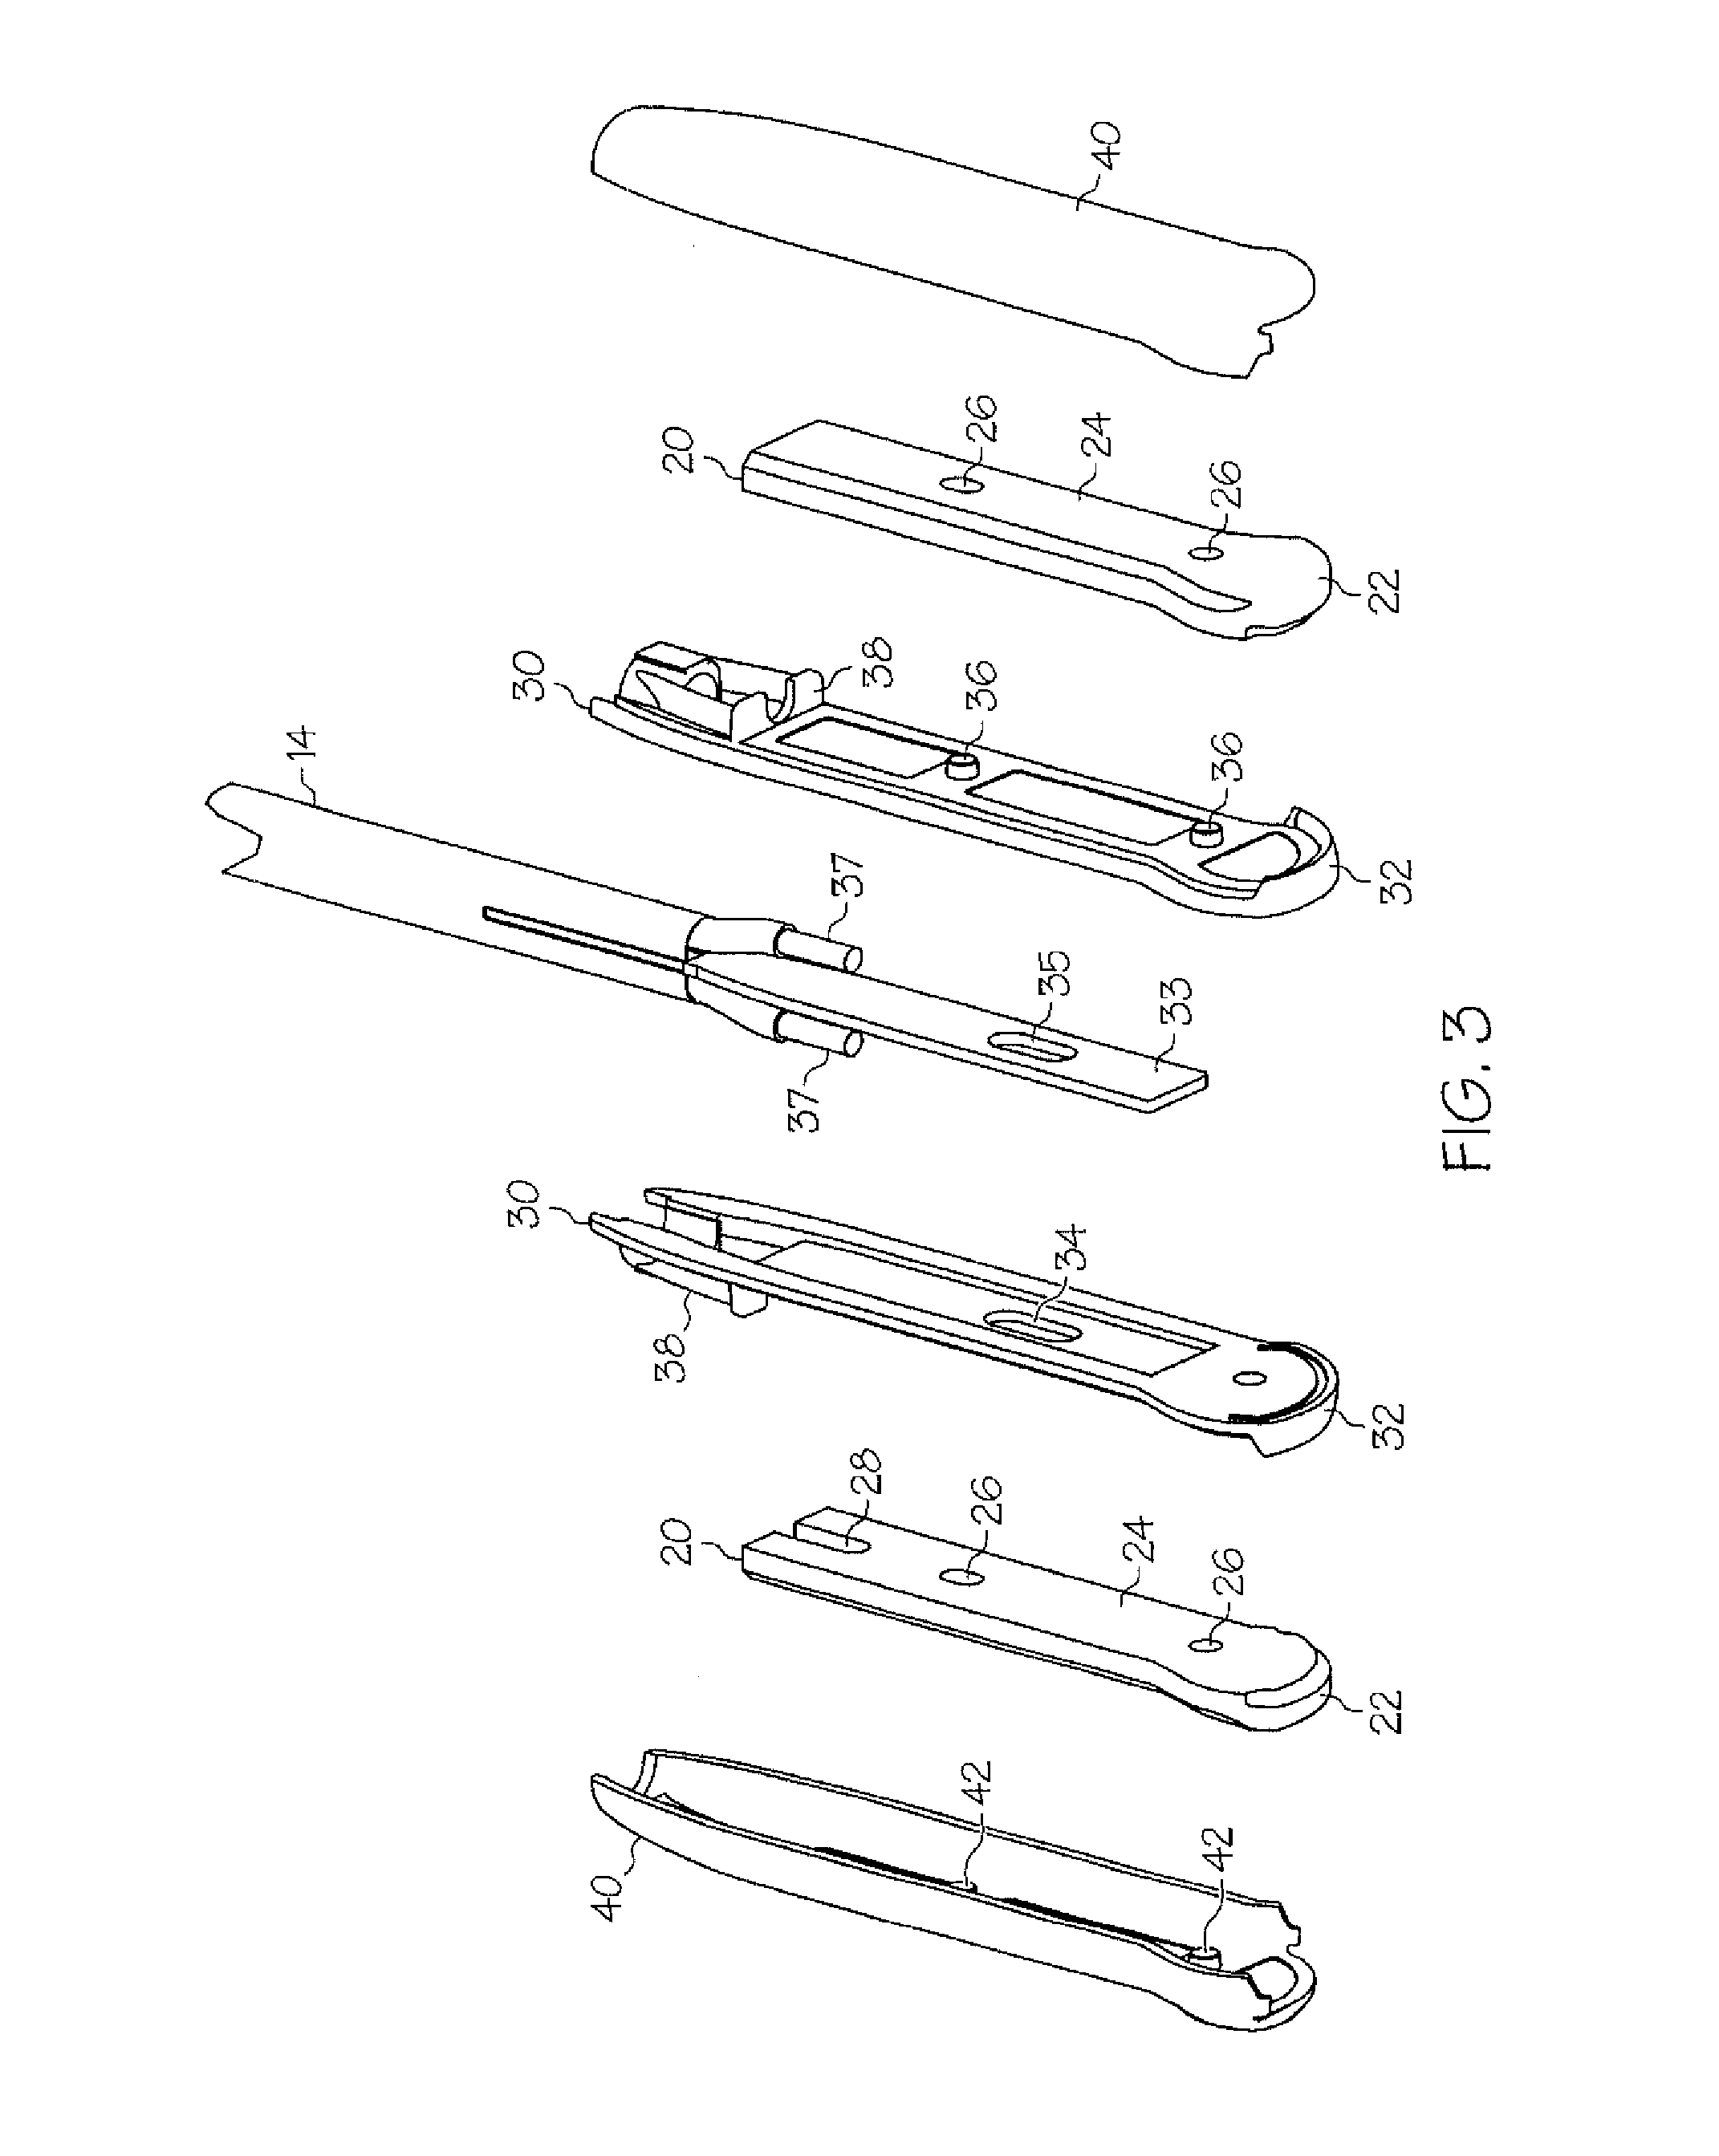 Ablation Device with Sensor